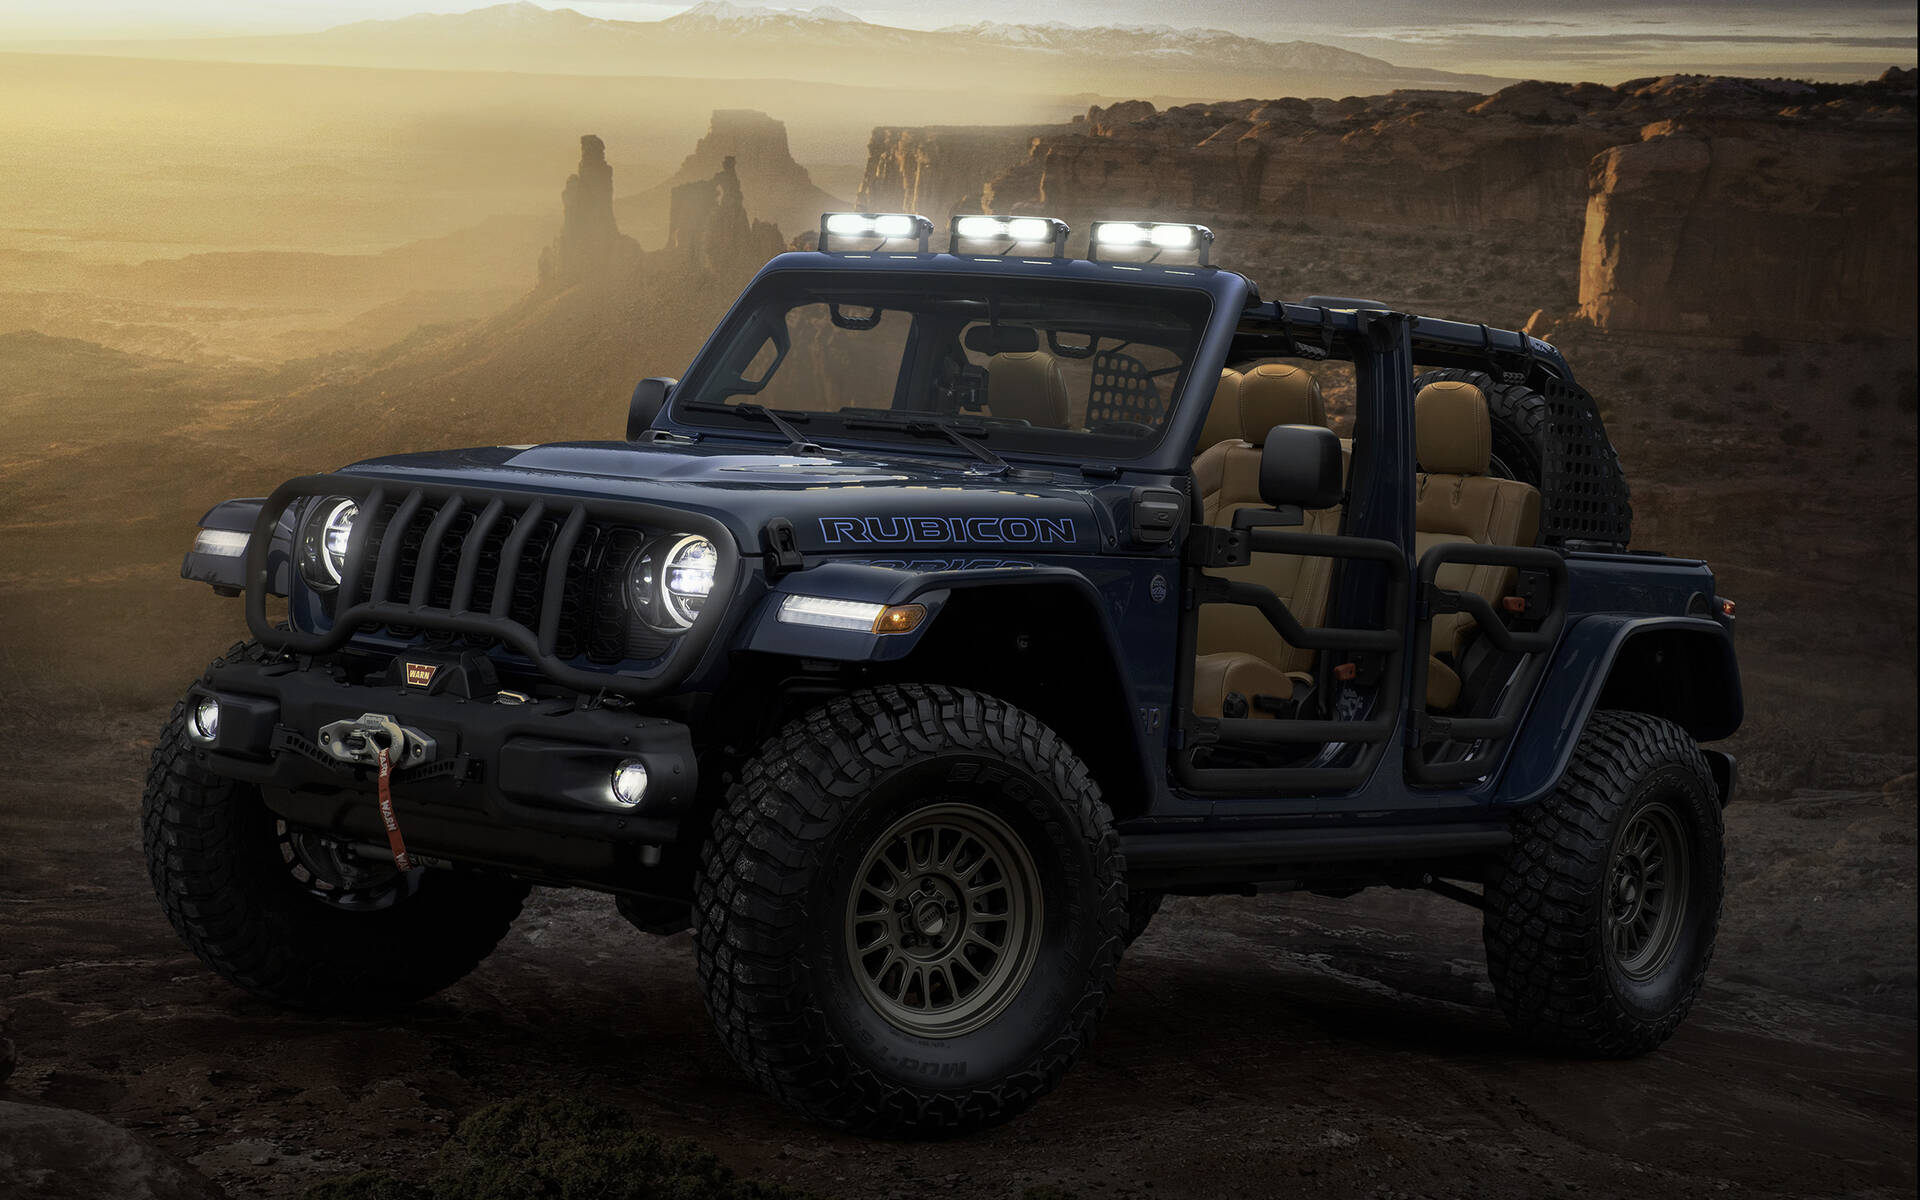 Jeep Easter Safari 2023 : 7 concepts spectaculaires présentés à Moab 567614-jeep-easter-safari-2023-7-concepts-spectaculaires-presentes-a-moab